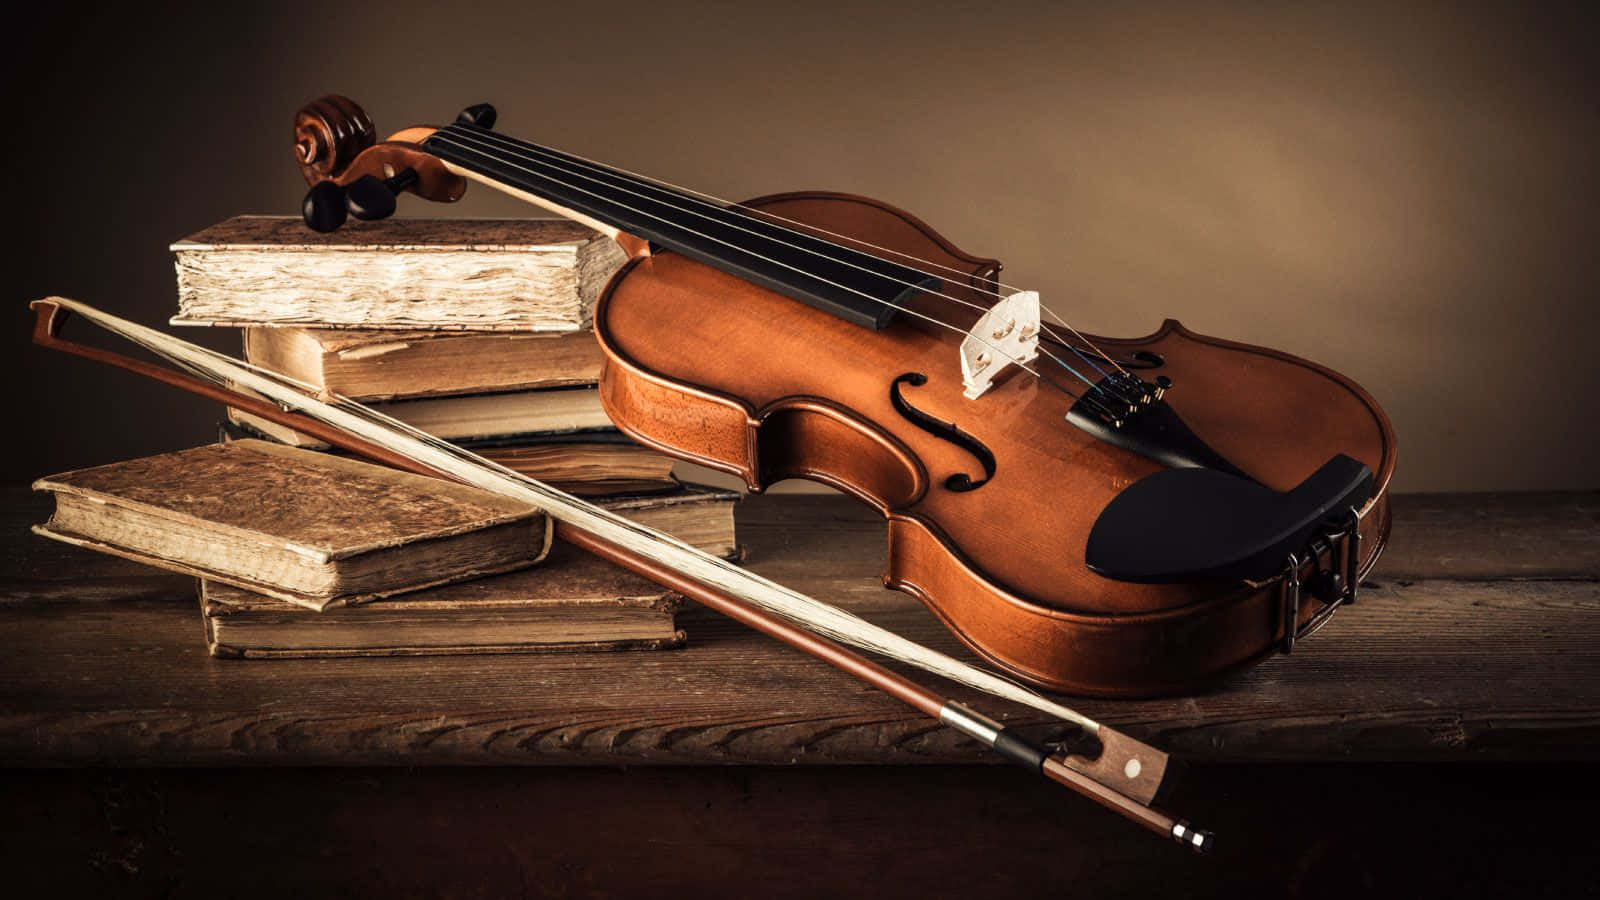 Enjoy the beauty of classical music Wallpaper